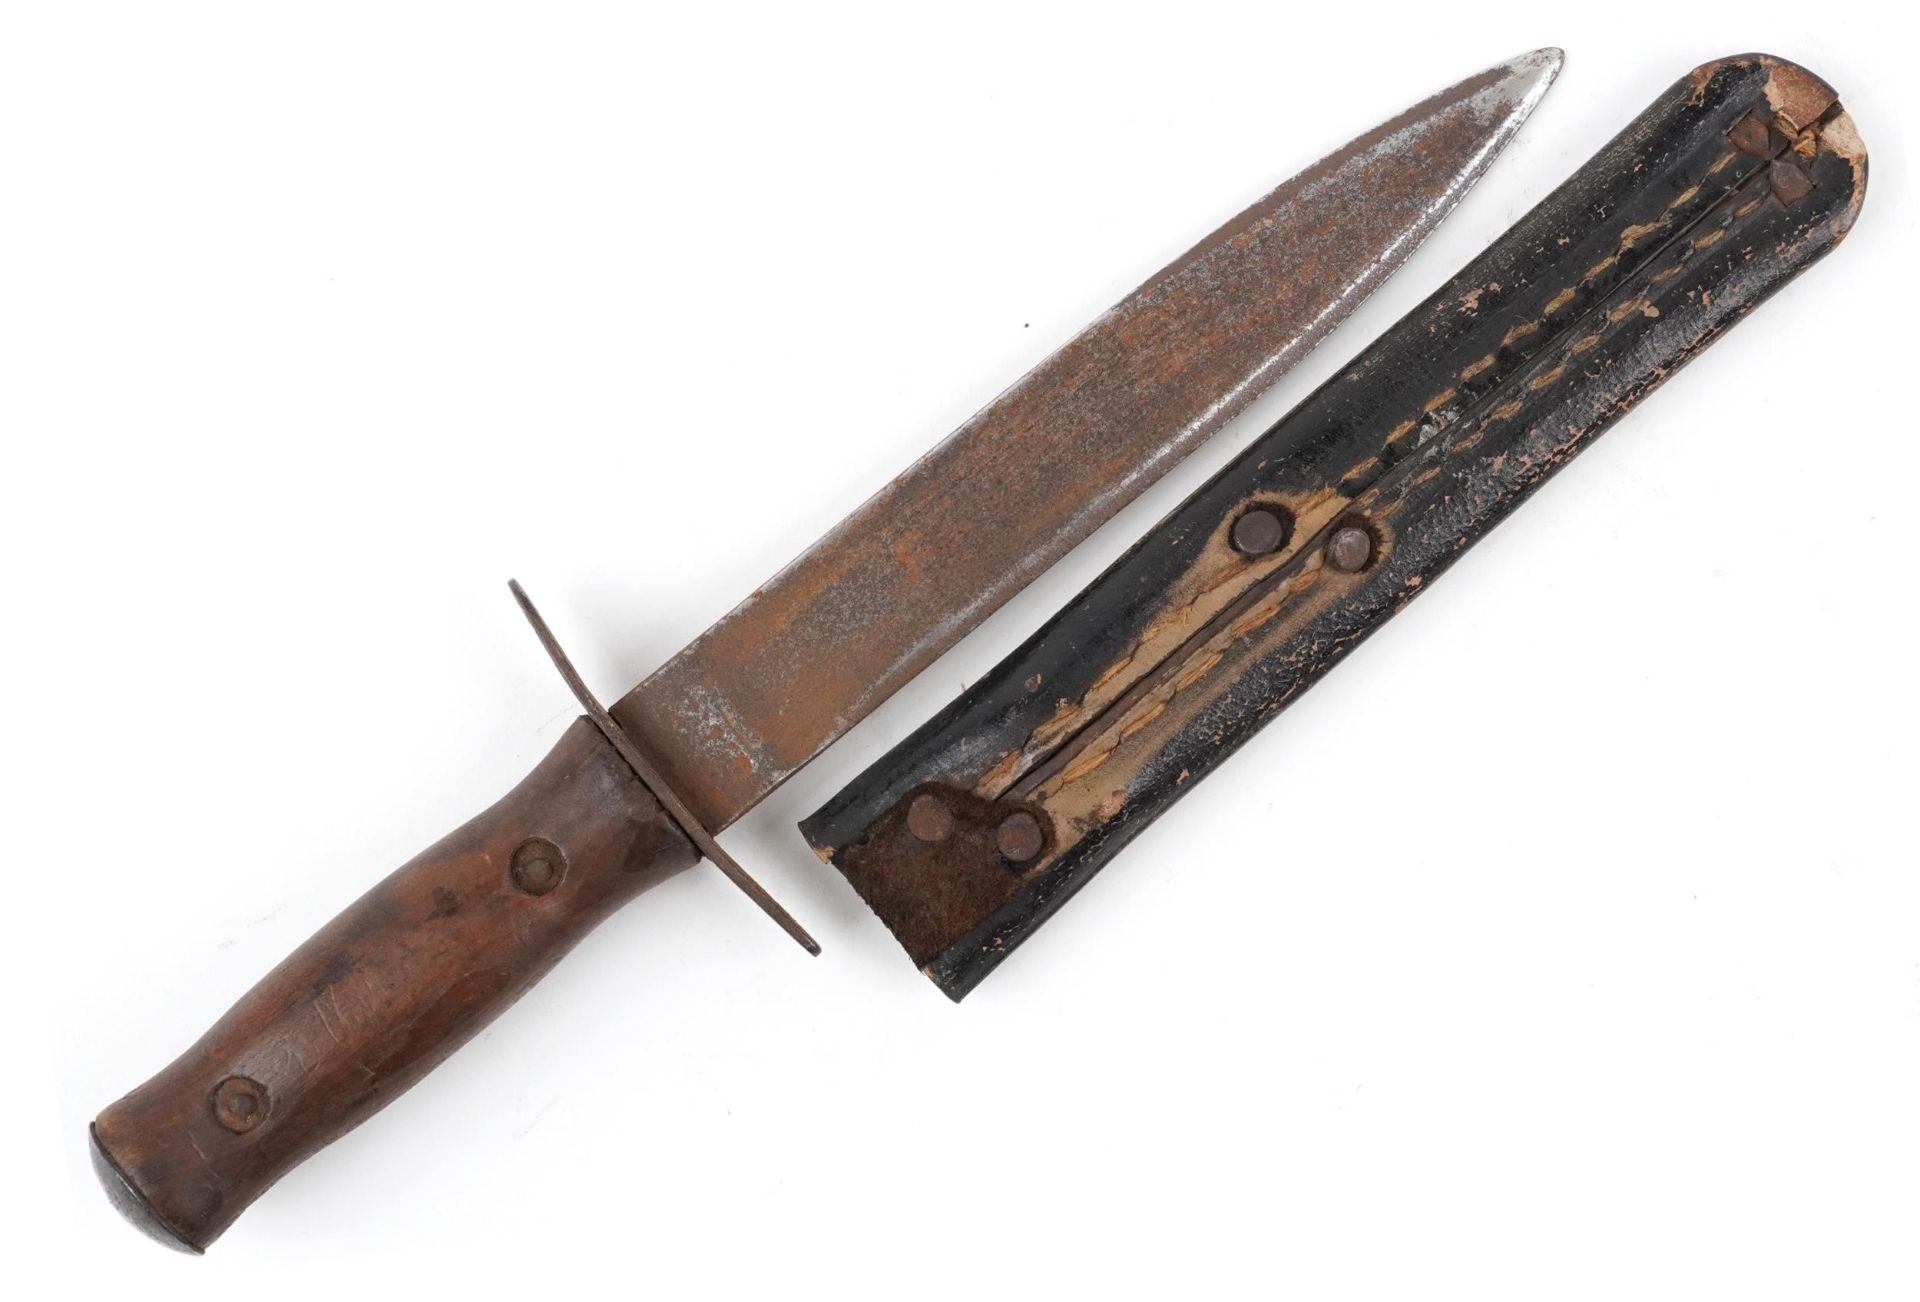 Italian military interest fascist Gil youth knife with leather sheath, hardwood handle and steel - Image 2 of 3